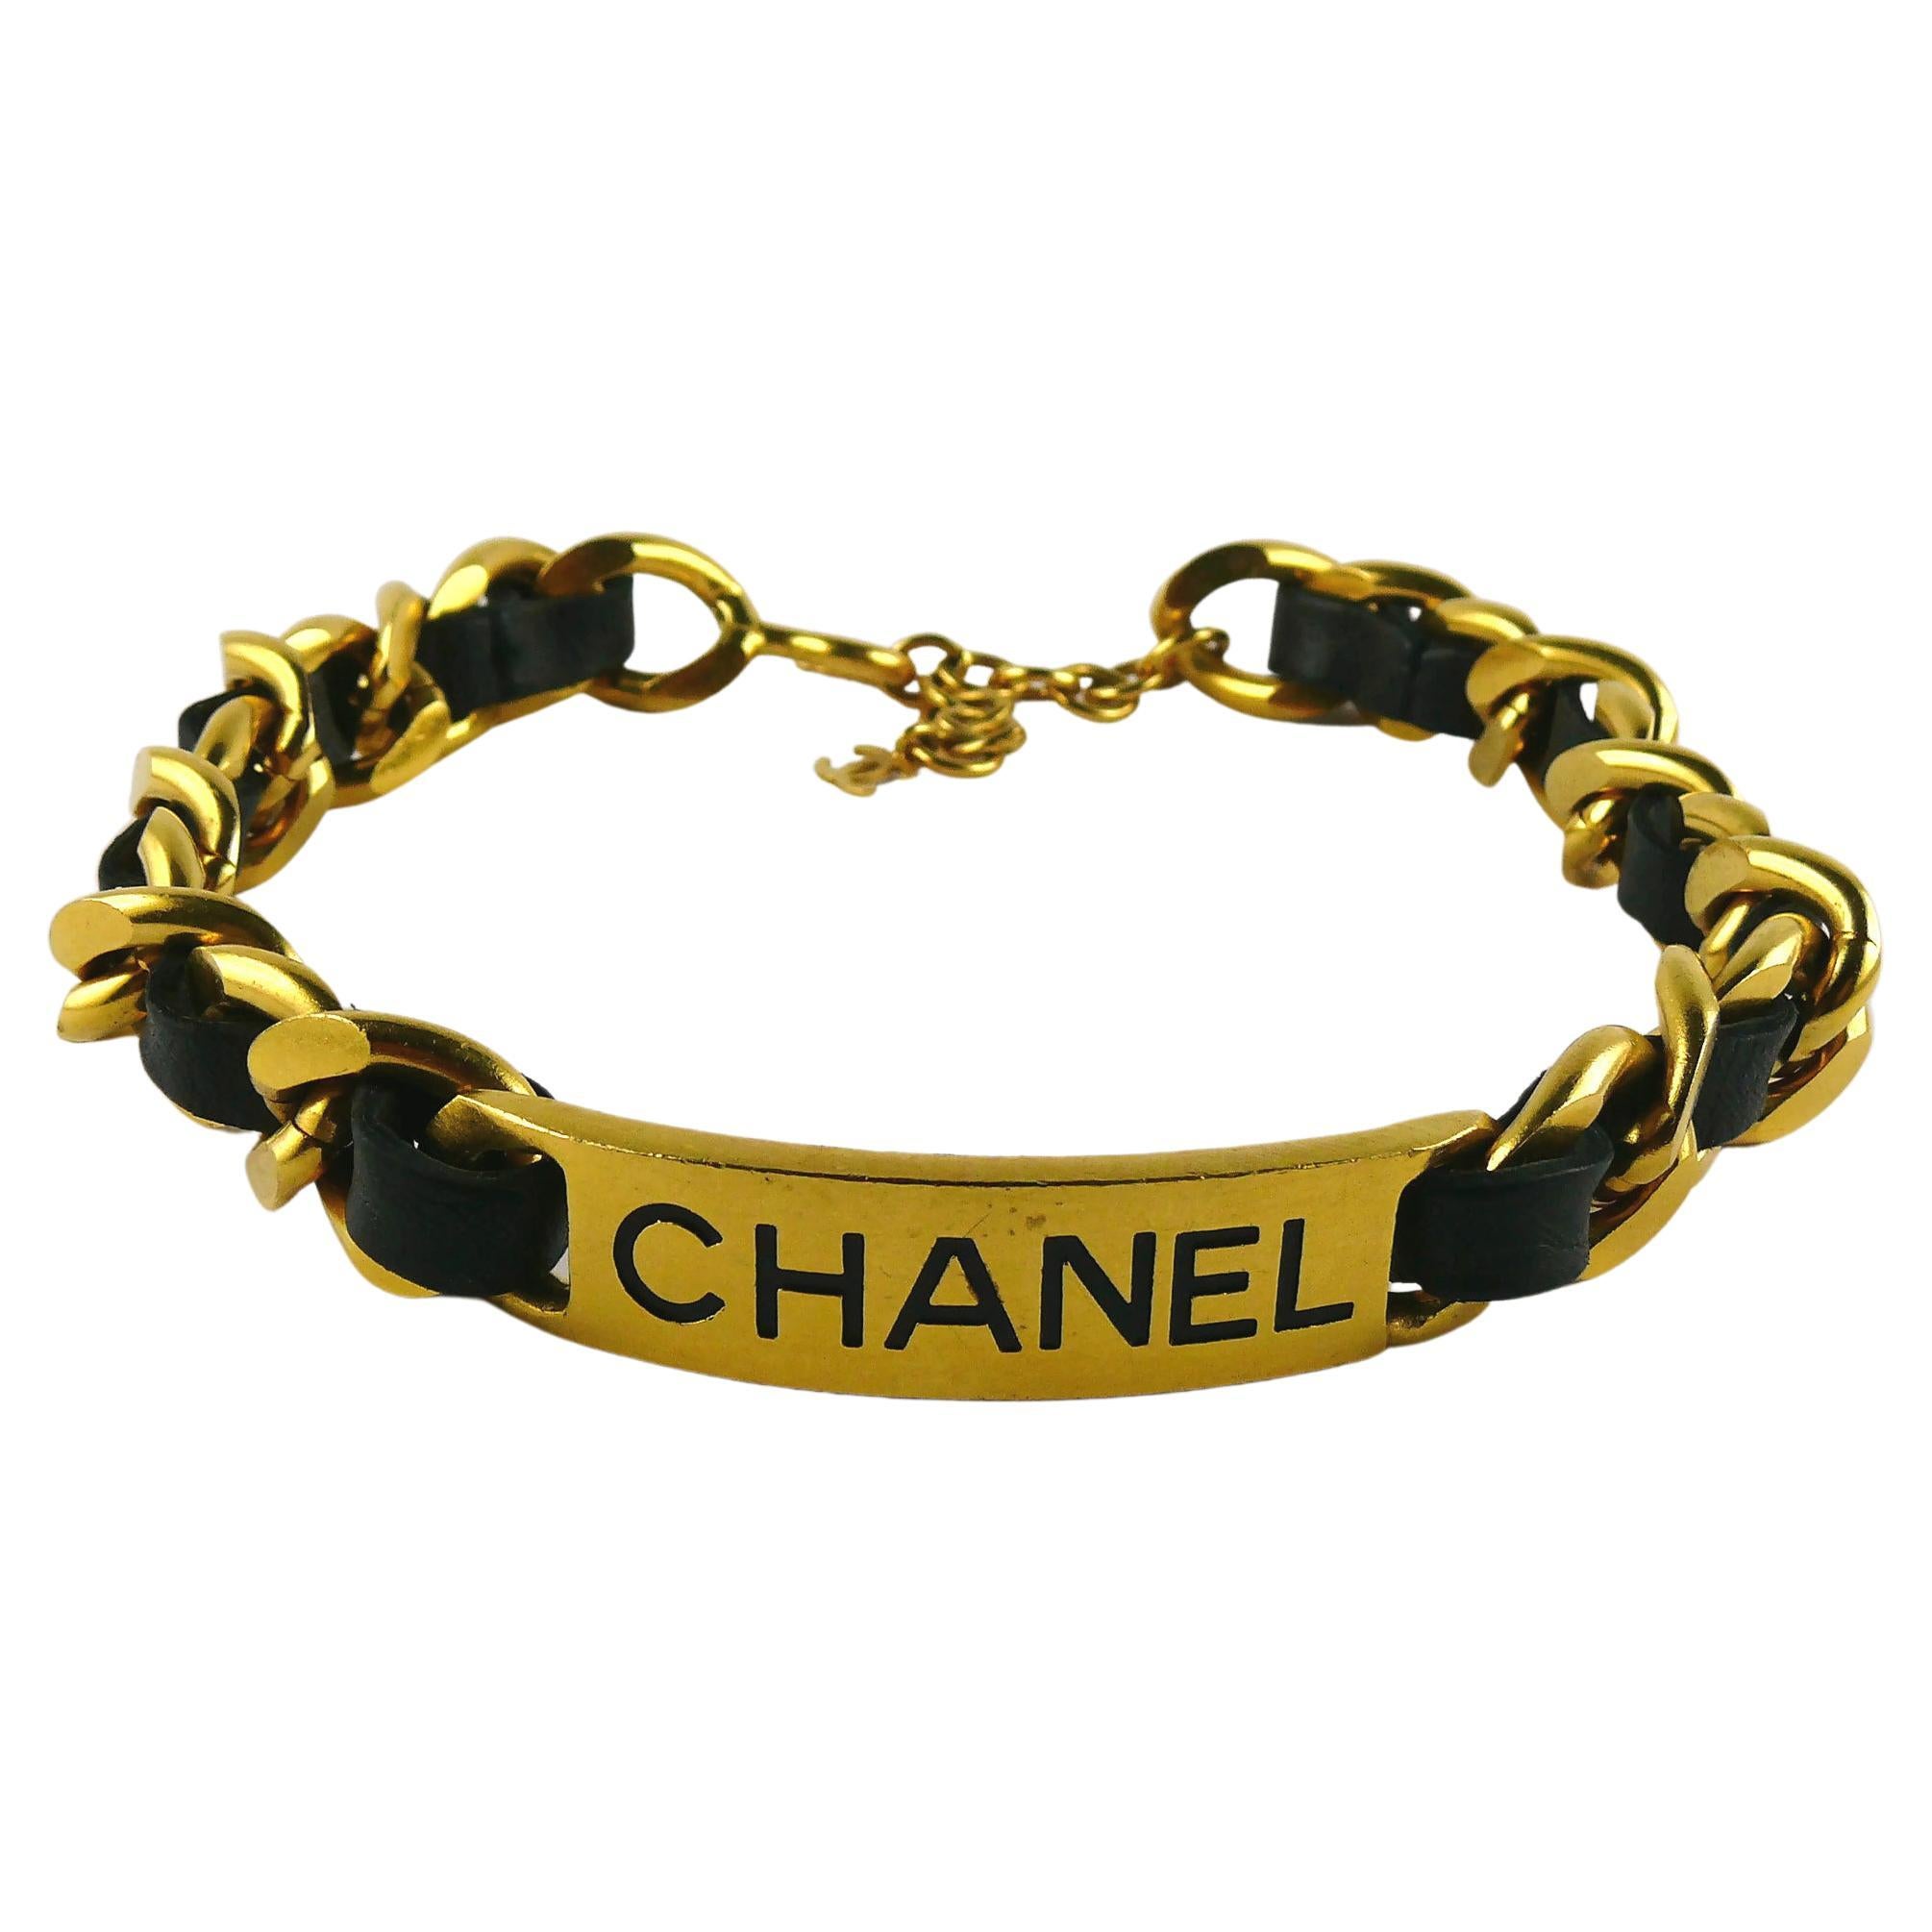 Chanel Iconic Vintage Gold Toned Chain Black Leather ID Tag Collar Necklace